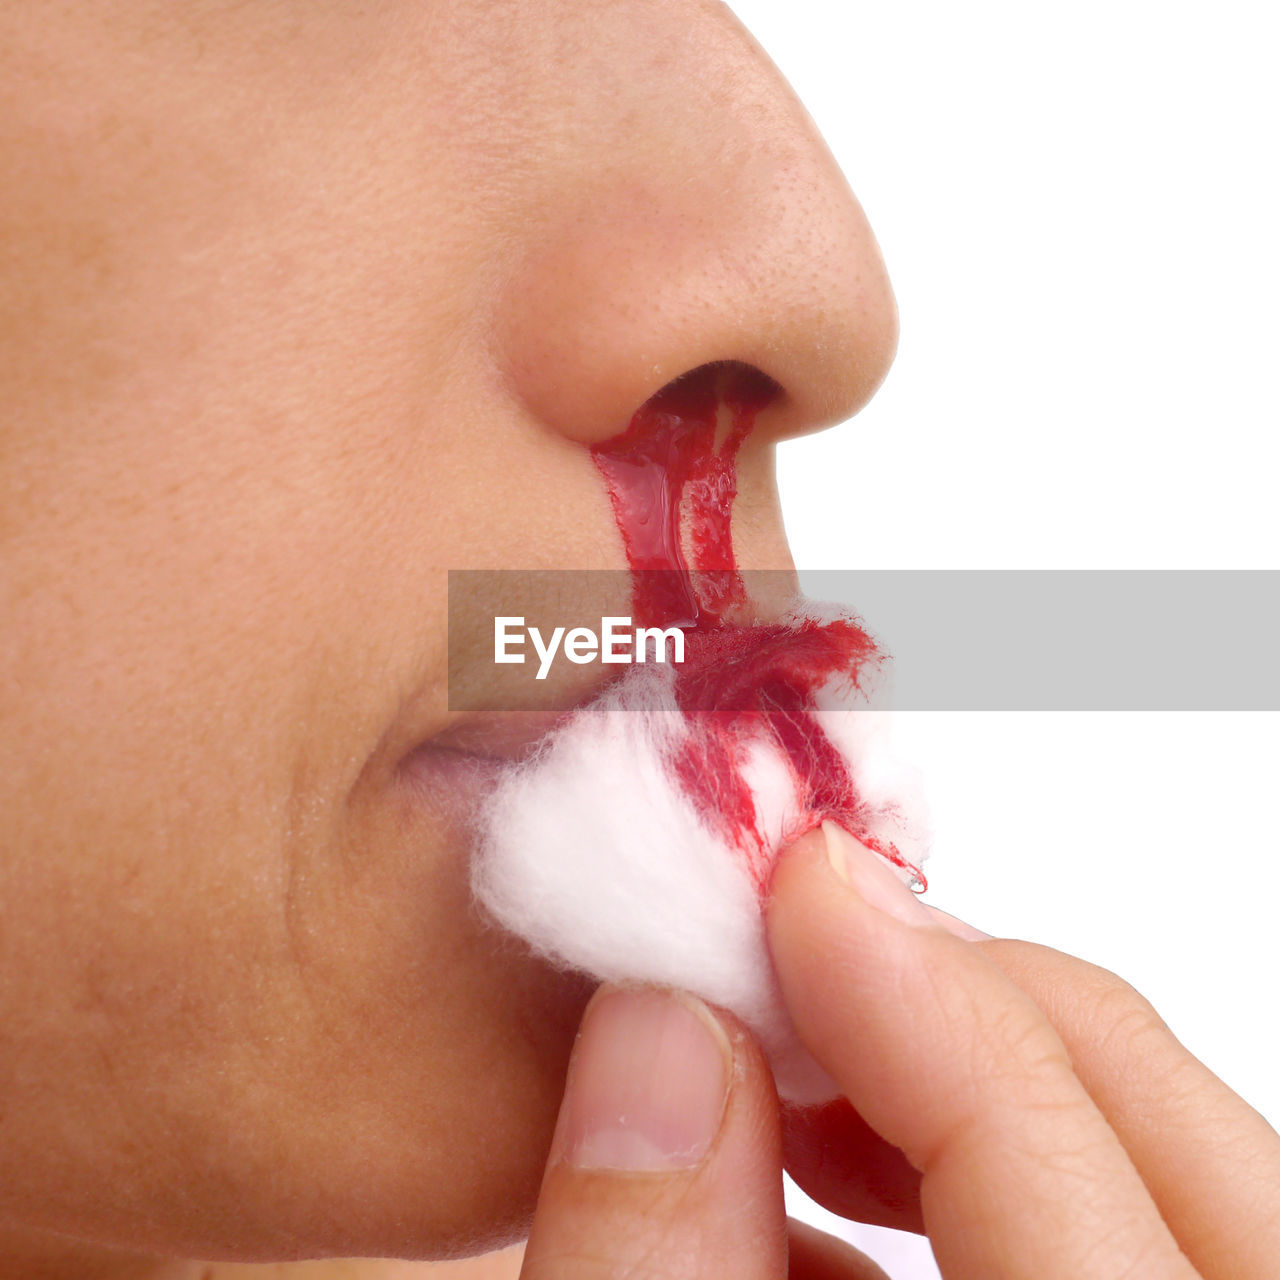 Midsection of boy with bleeding nose against white background